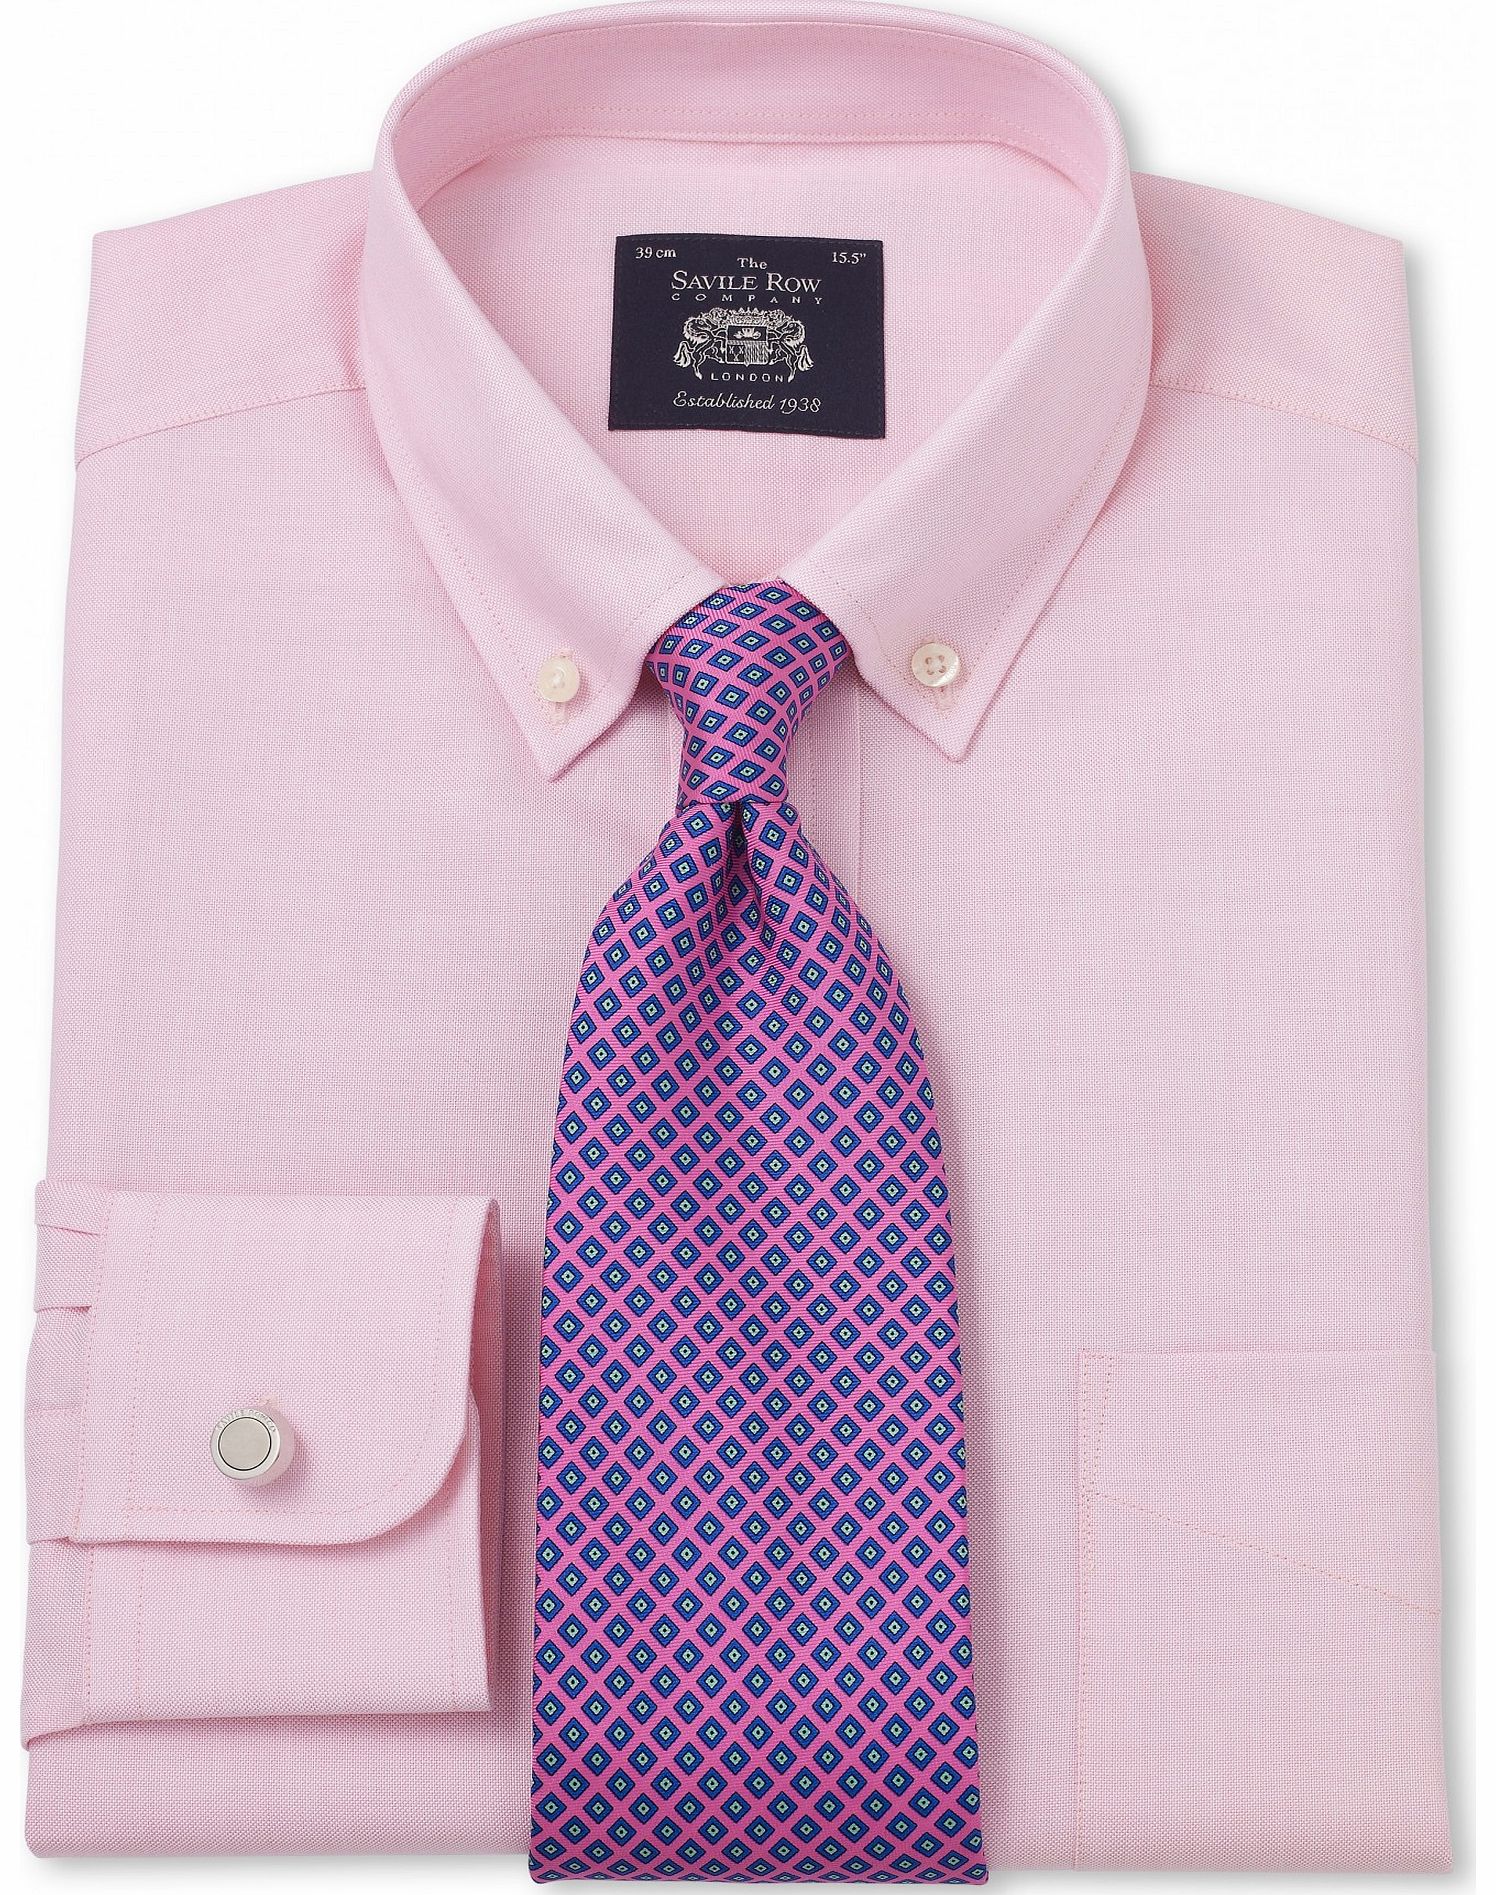 Savile Row Company Pink Pinpoint Classic Fit Shirt 17`` Lengthened